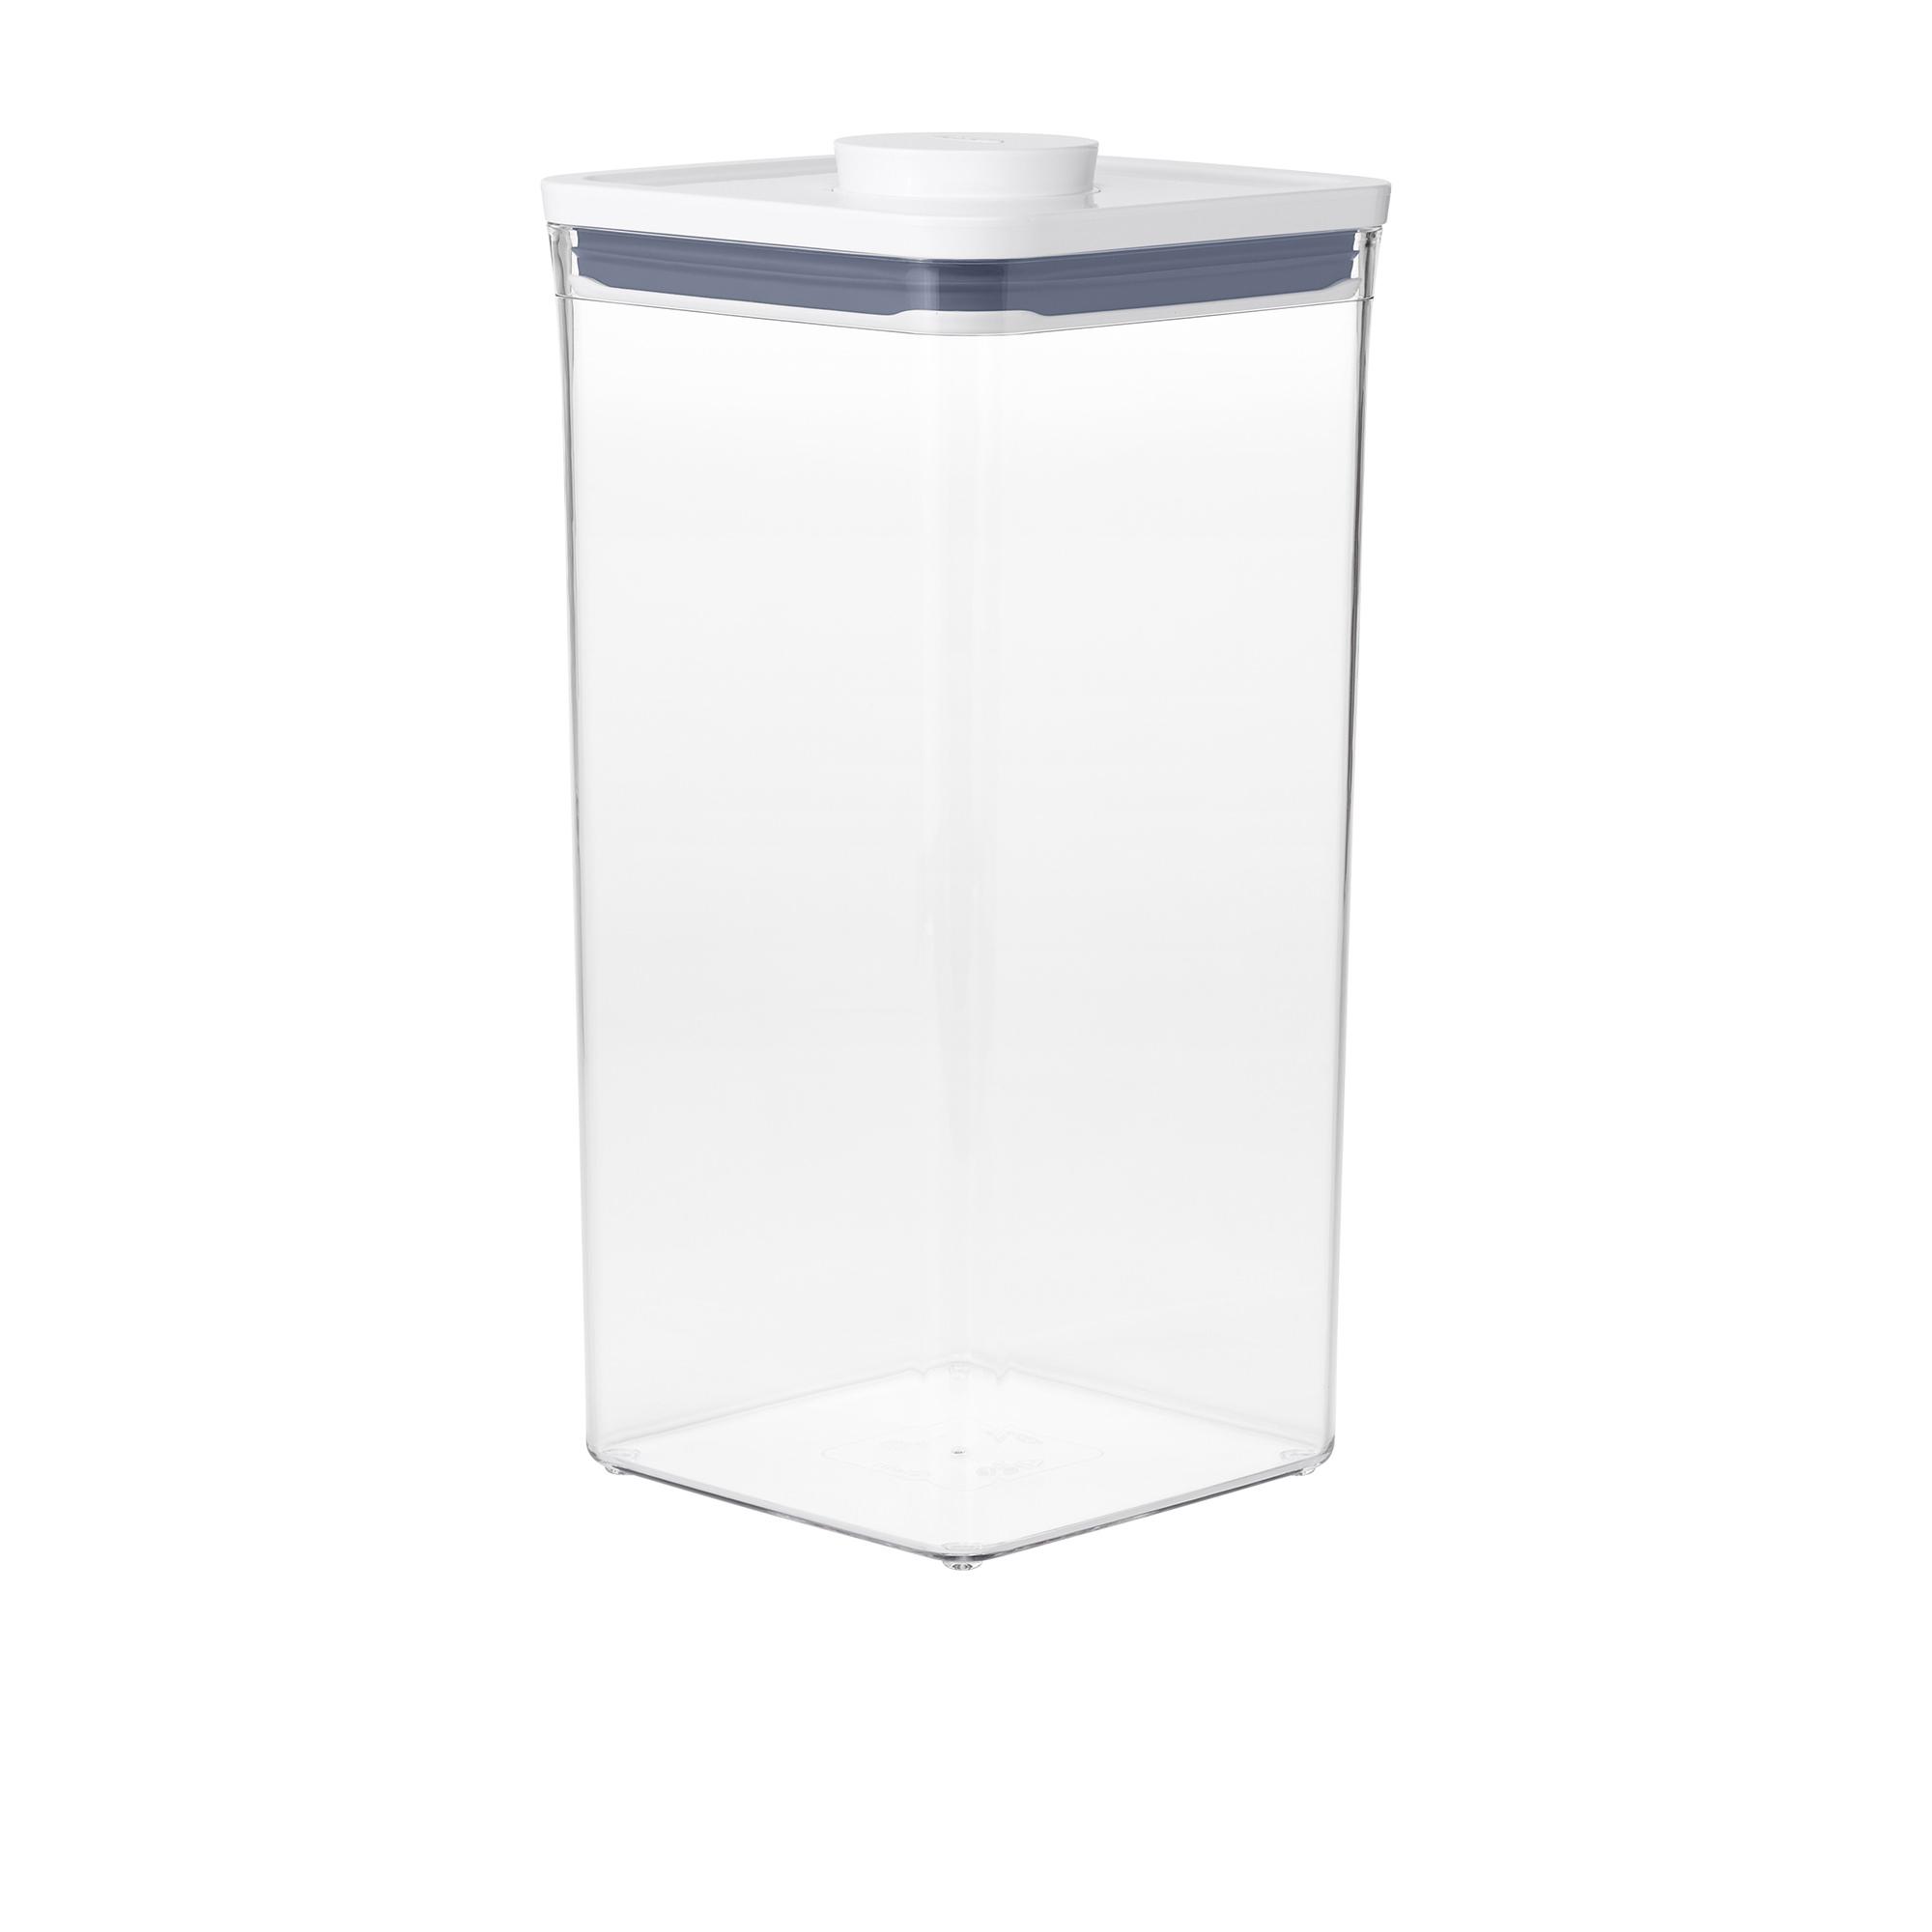 OXO Good Grips Square Pop 2.0 Big Container 5.7L Image 4